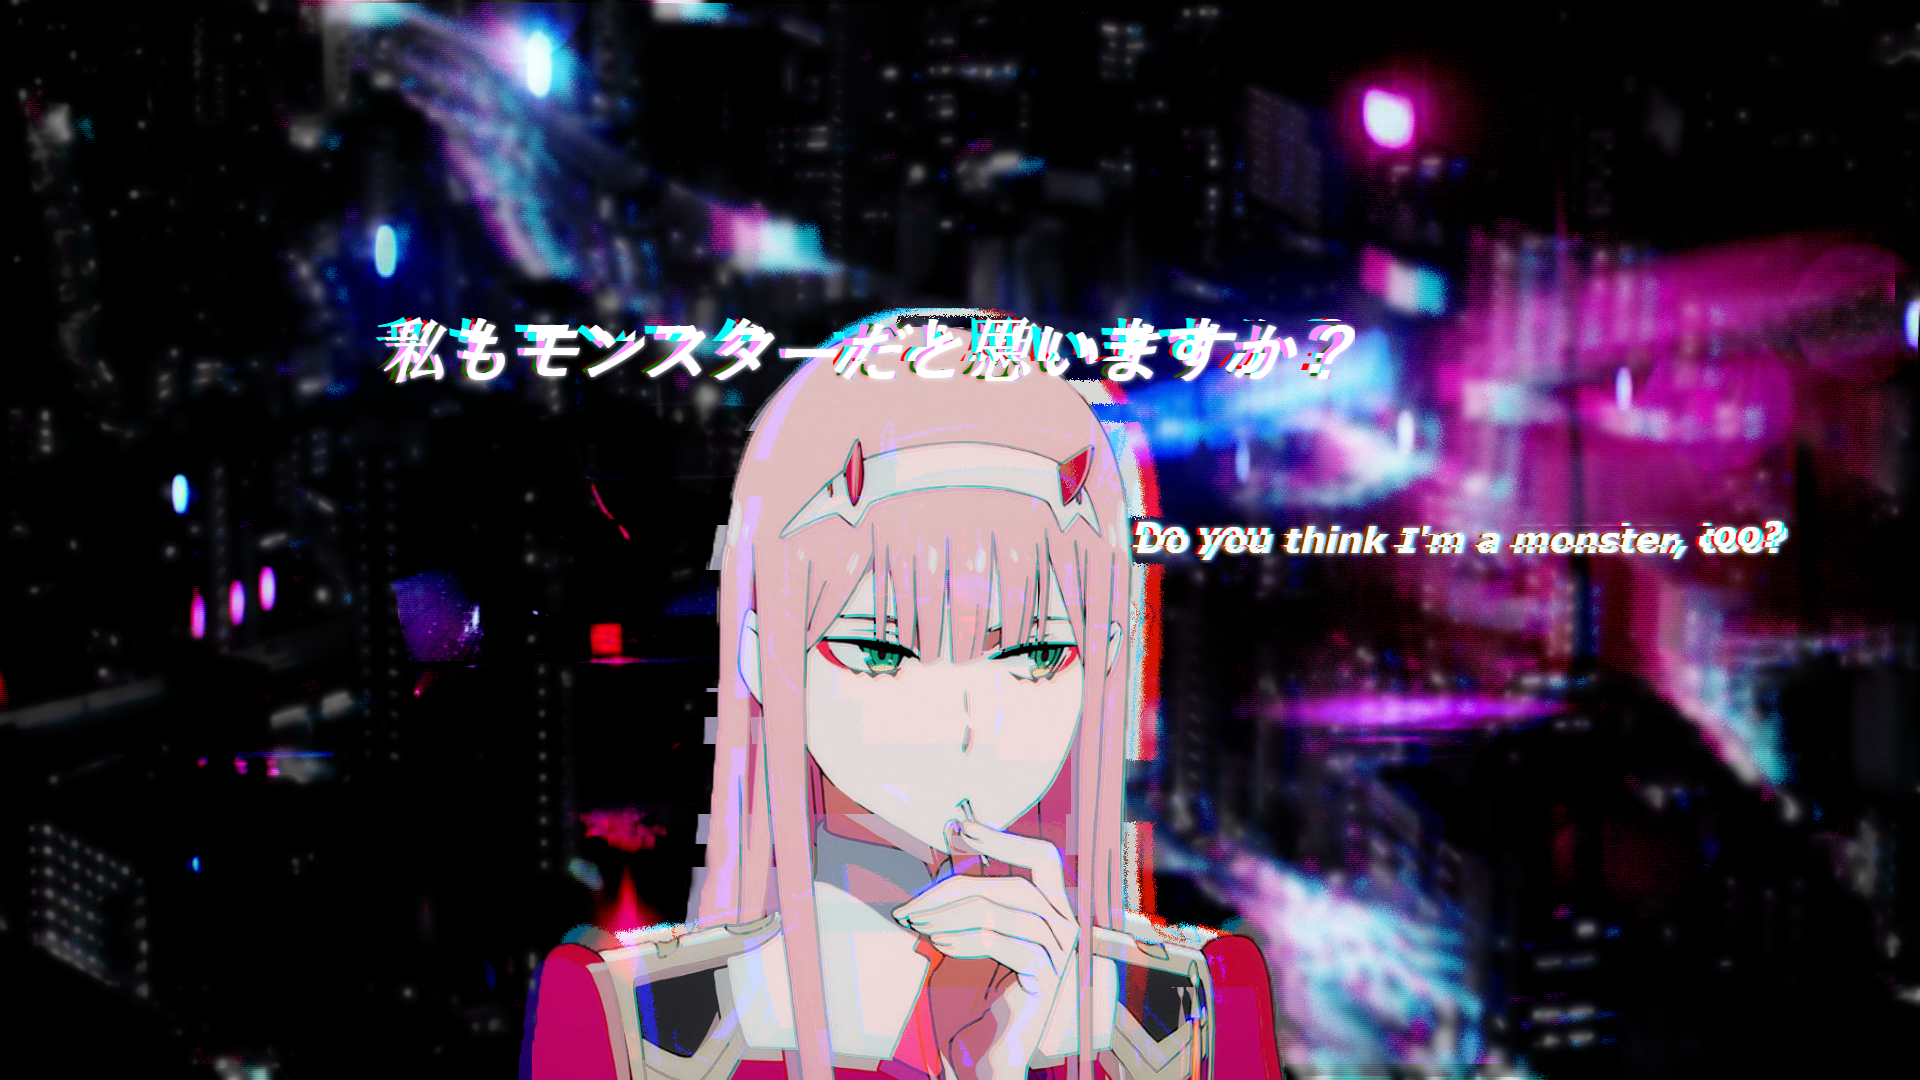 Wallpaper girl shadow pink background 002 Darling In The Frankxx Cute  in France Zero Two images for desktop section сёнэн  download